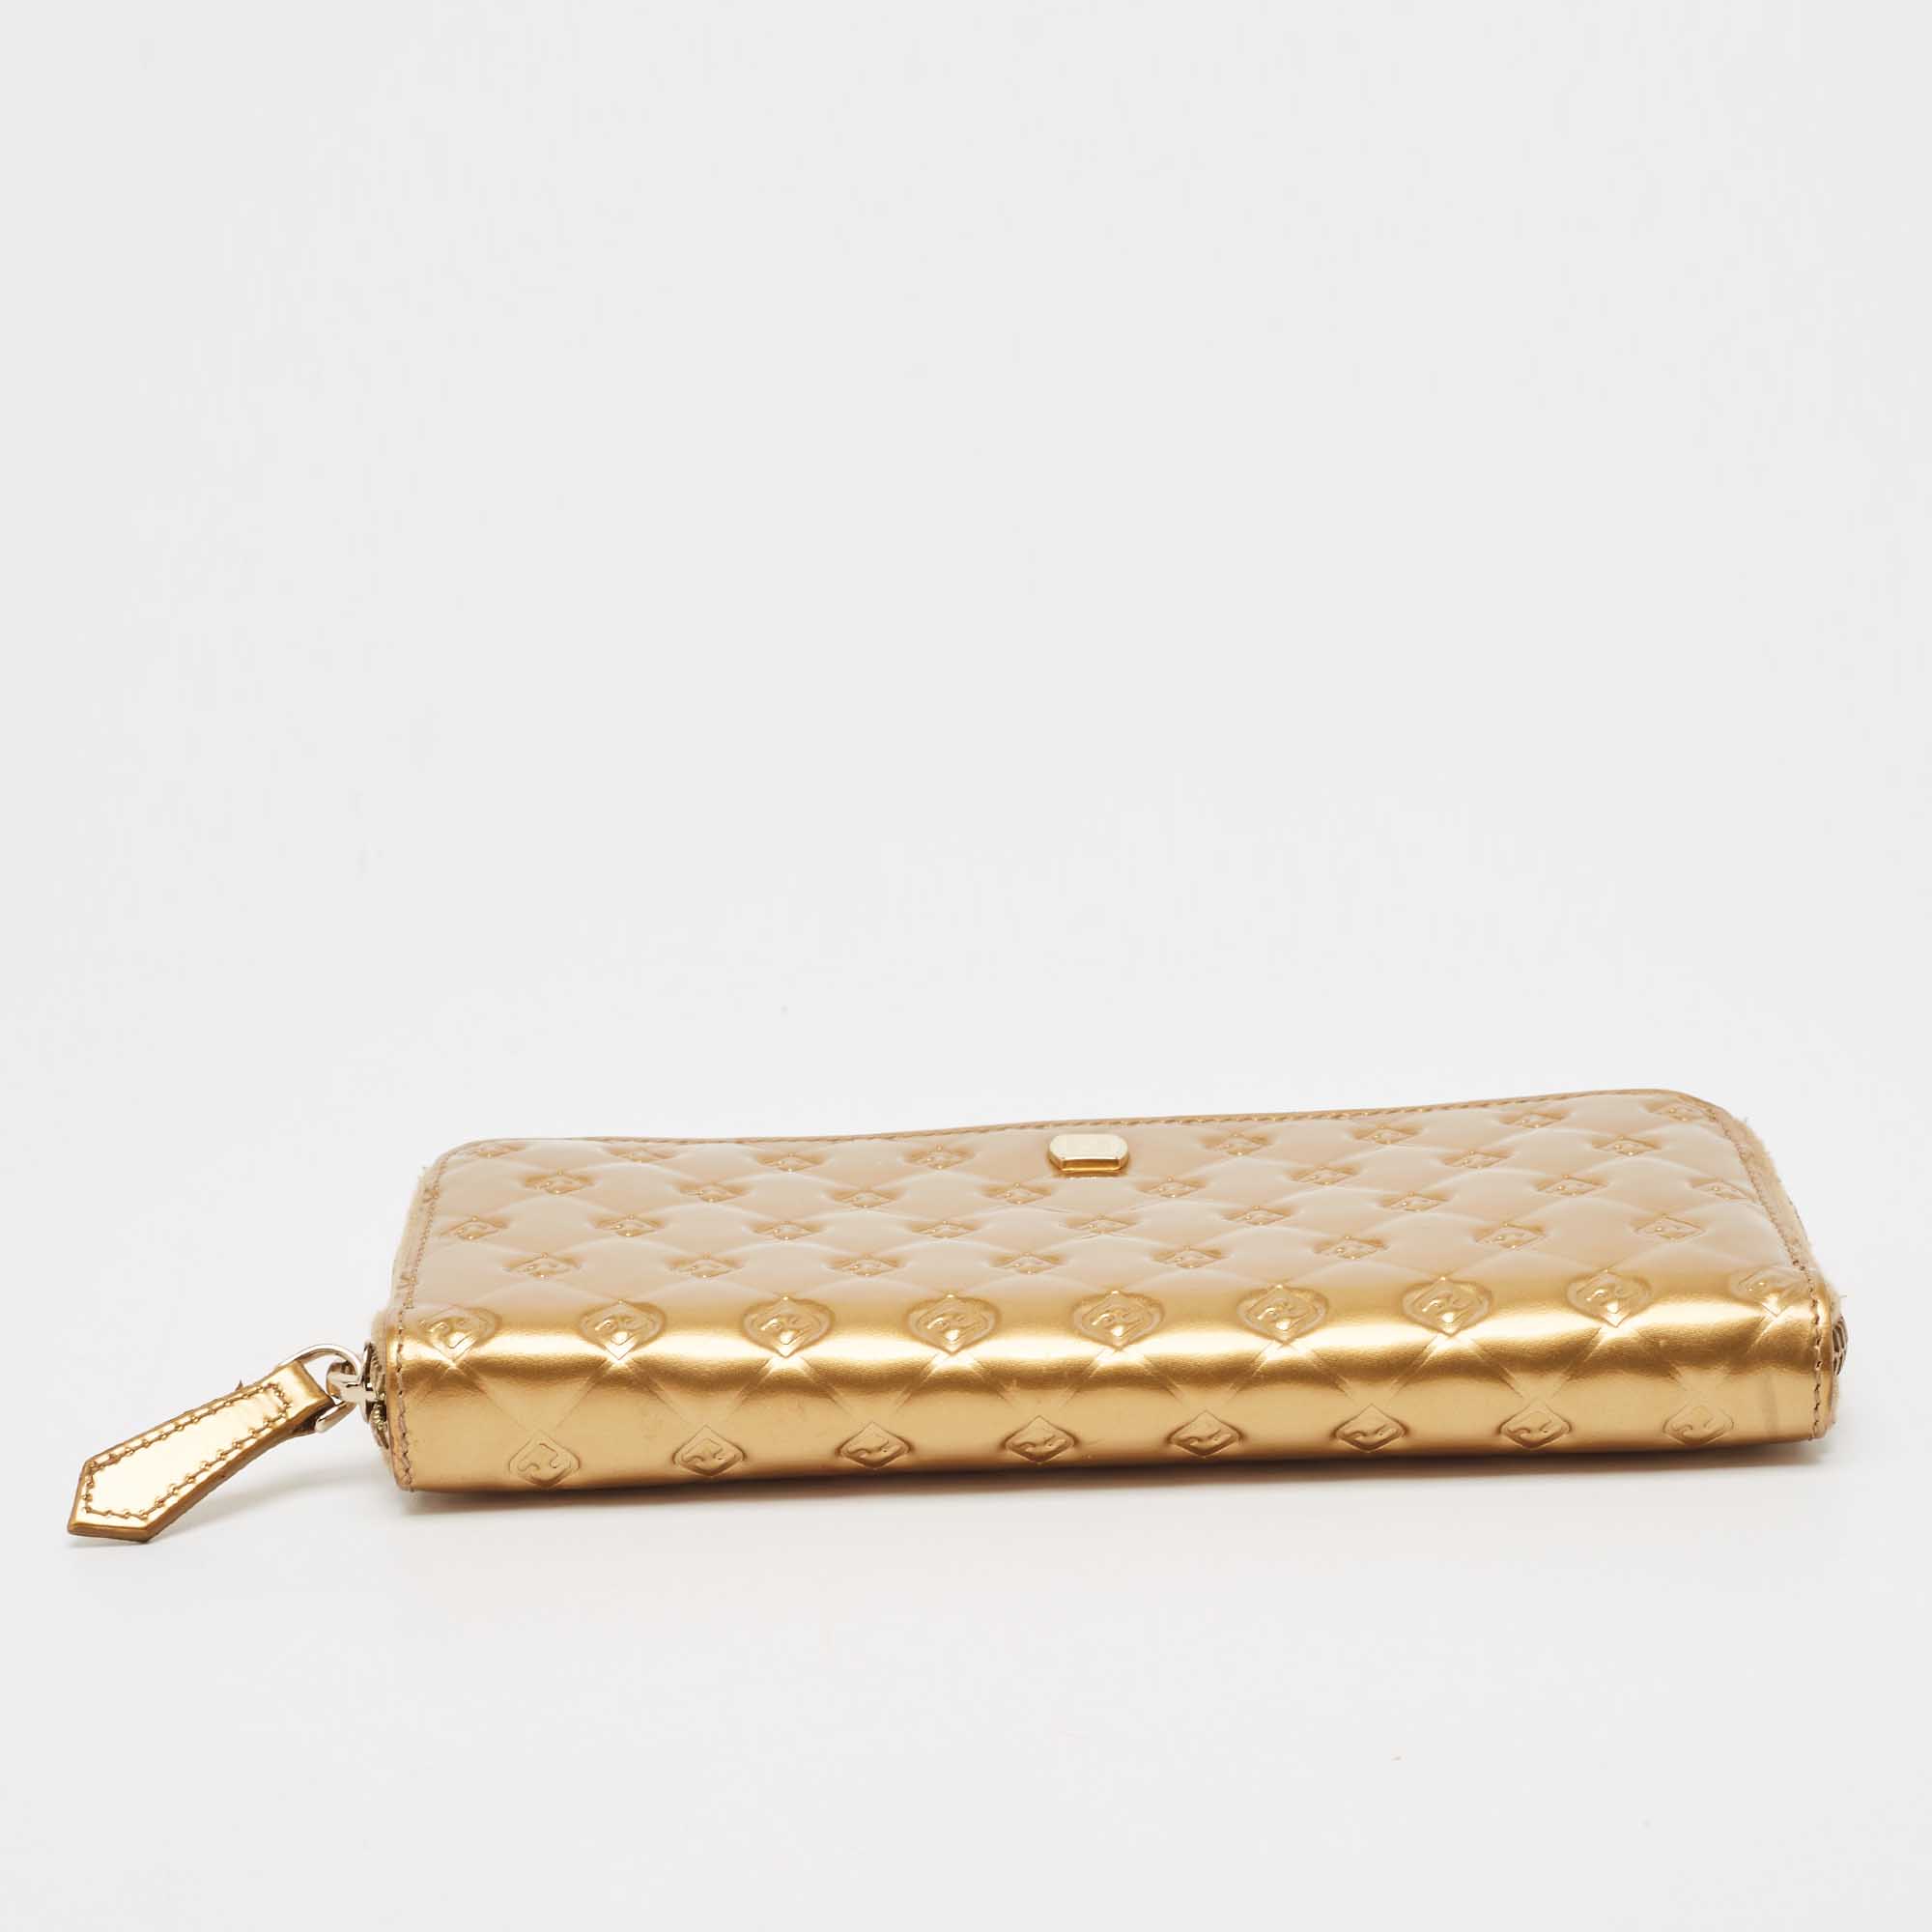 Fendi Gold Embossed Patent Leather Fendilicious Continental Wallet